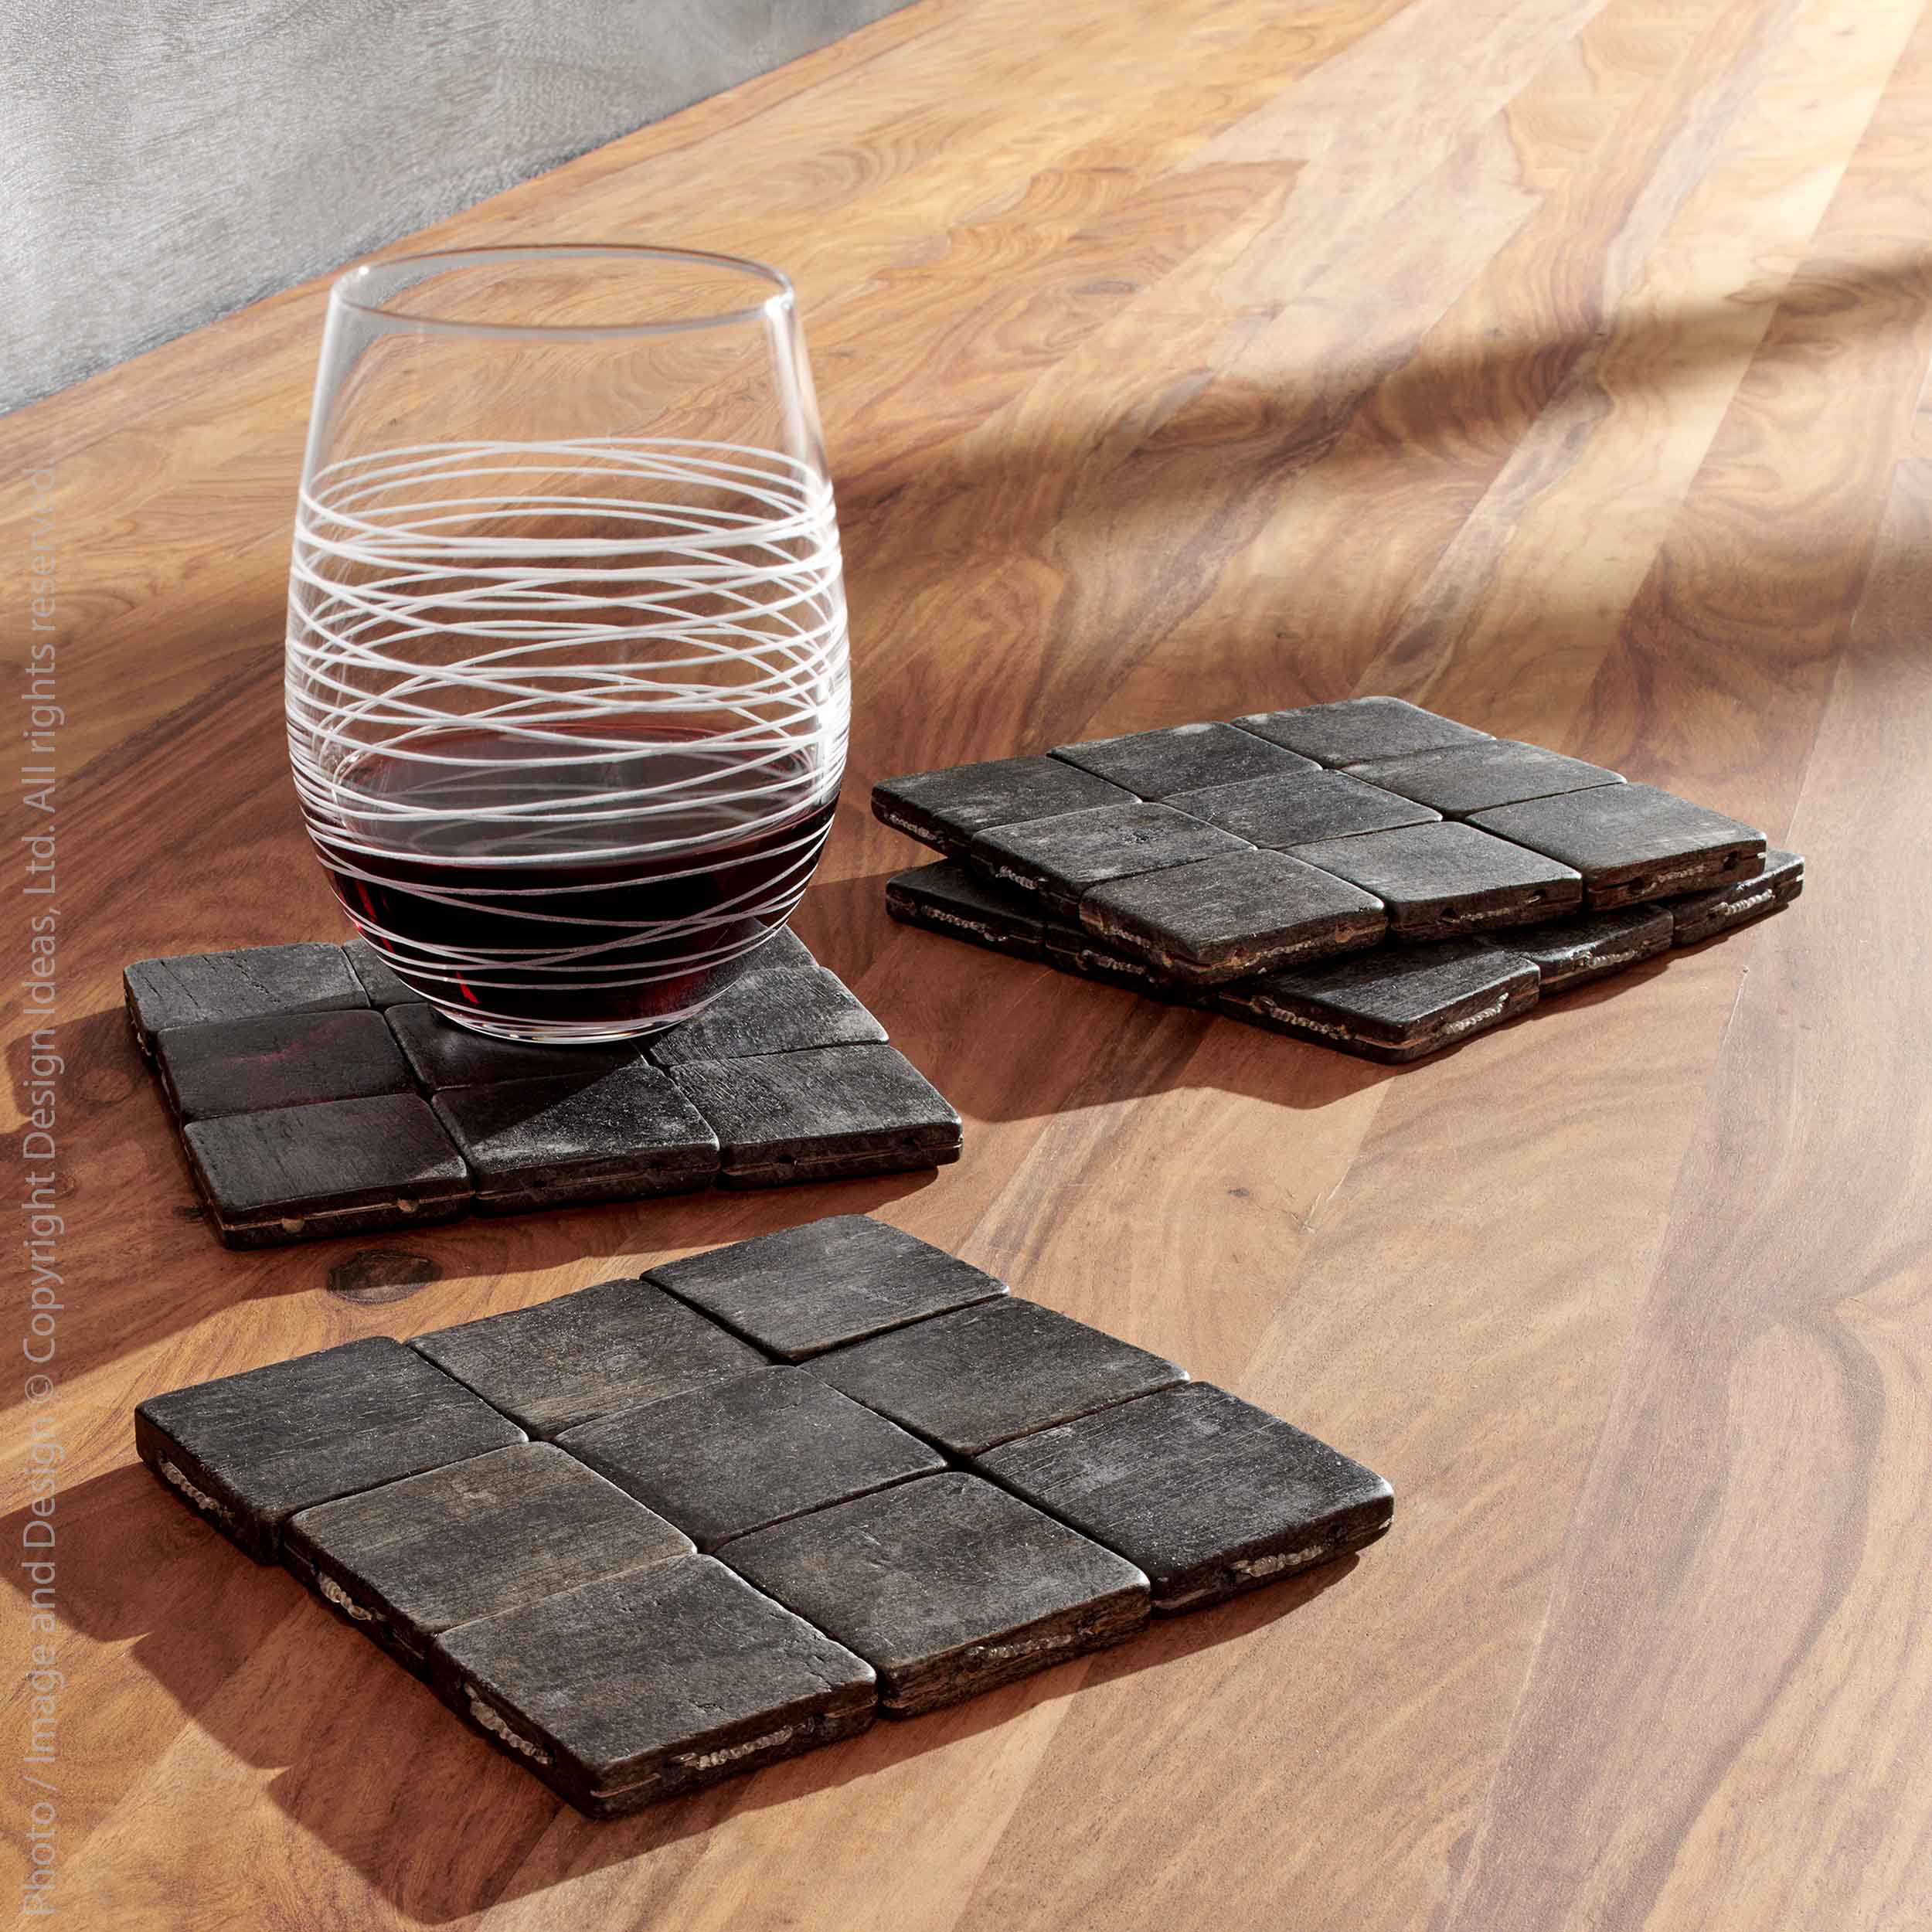 Bremen™ Acacia Wood Coasters (set of 4) - (colors: Natural, Black) | Premium Coaster from the Bremen™ collection | made with Acacia Wood for long lasting use